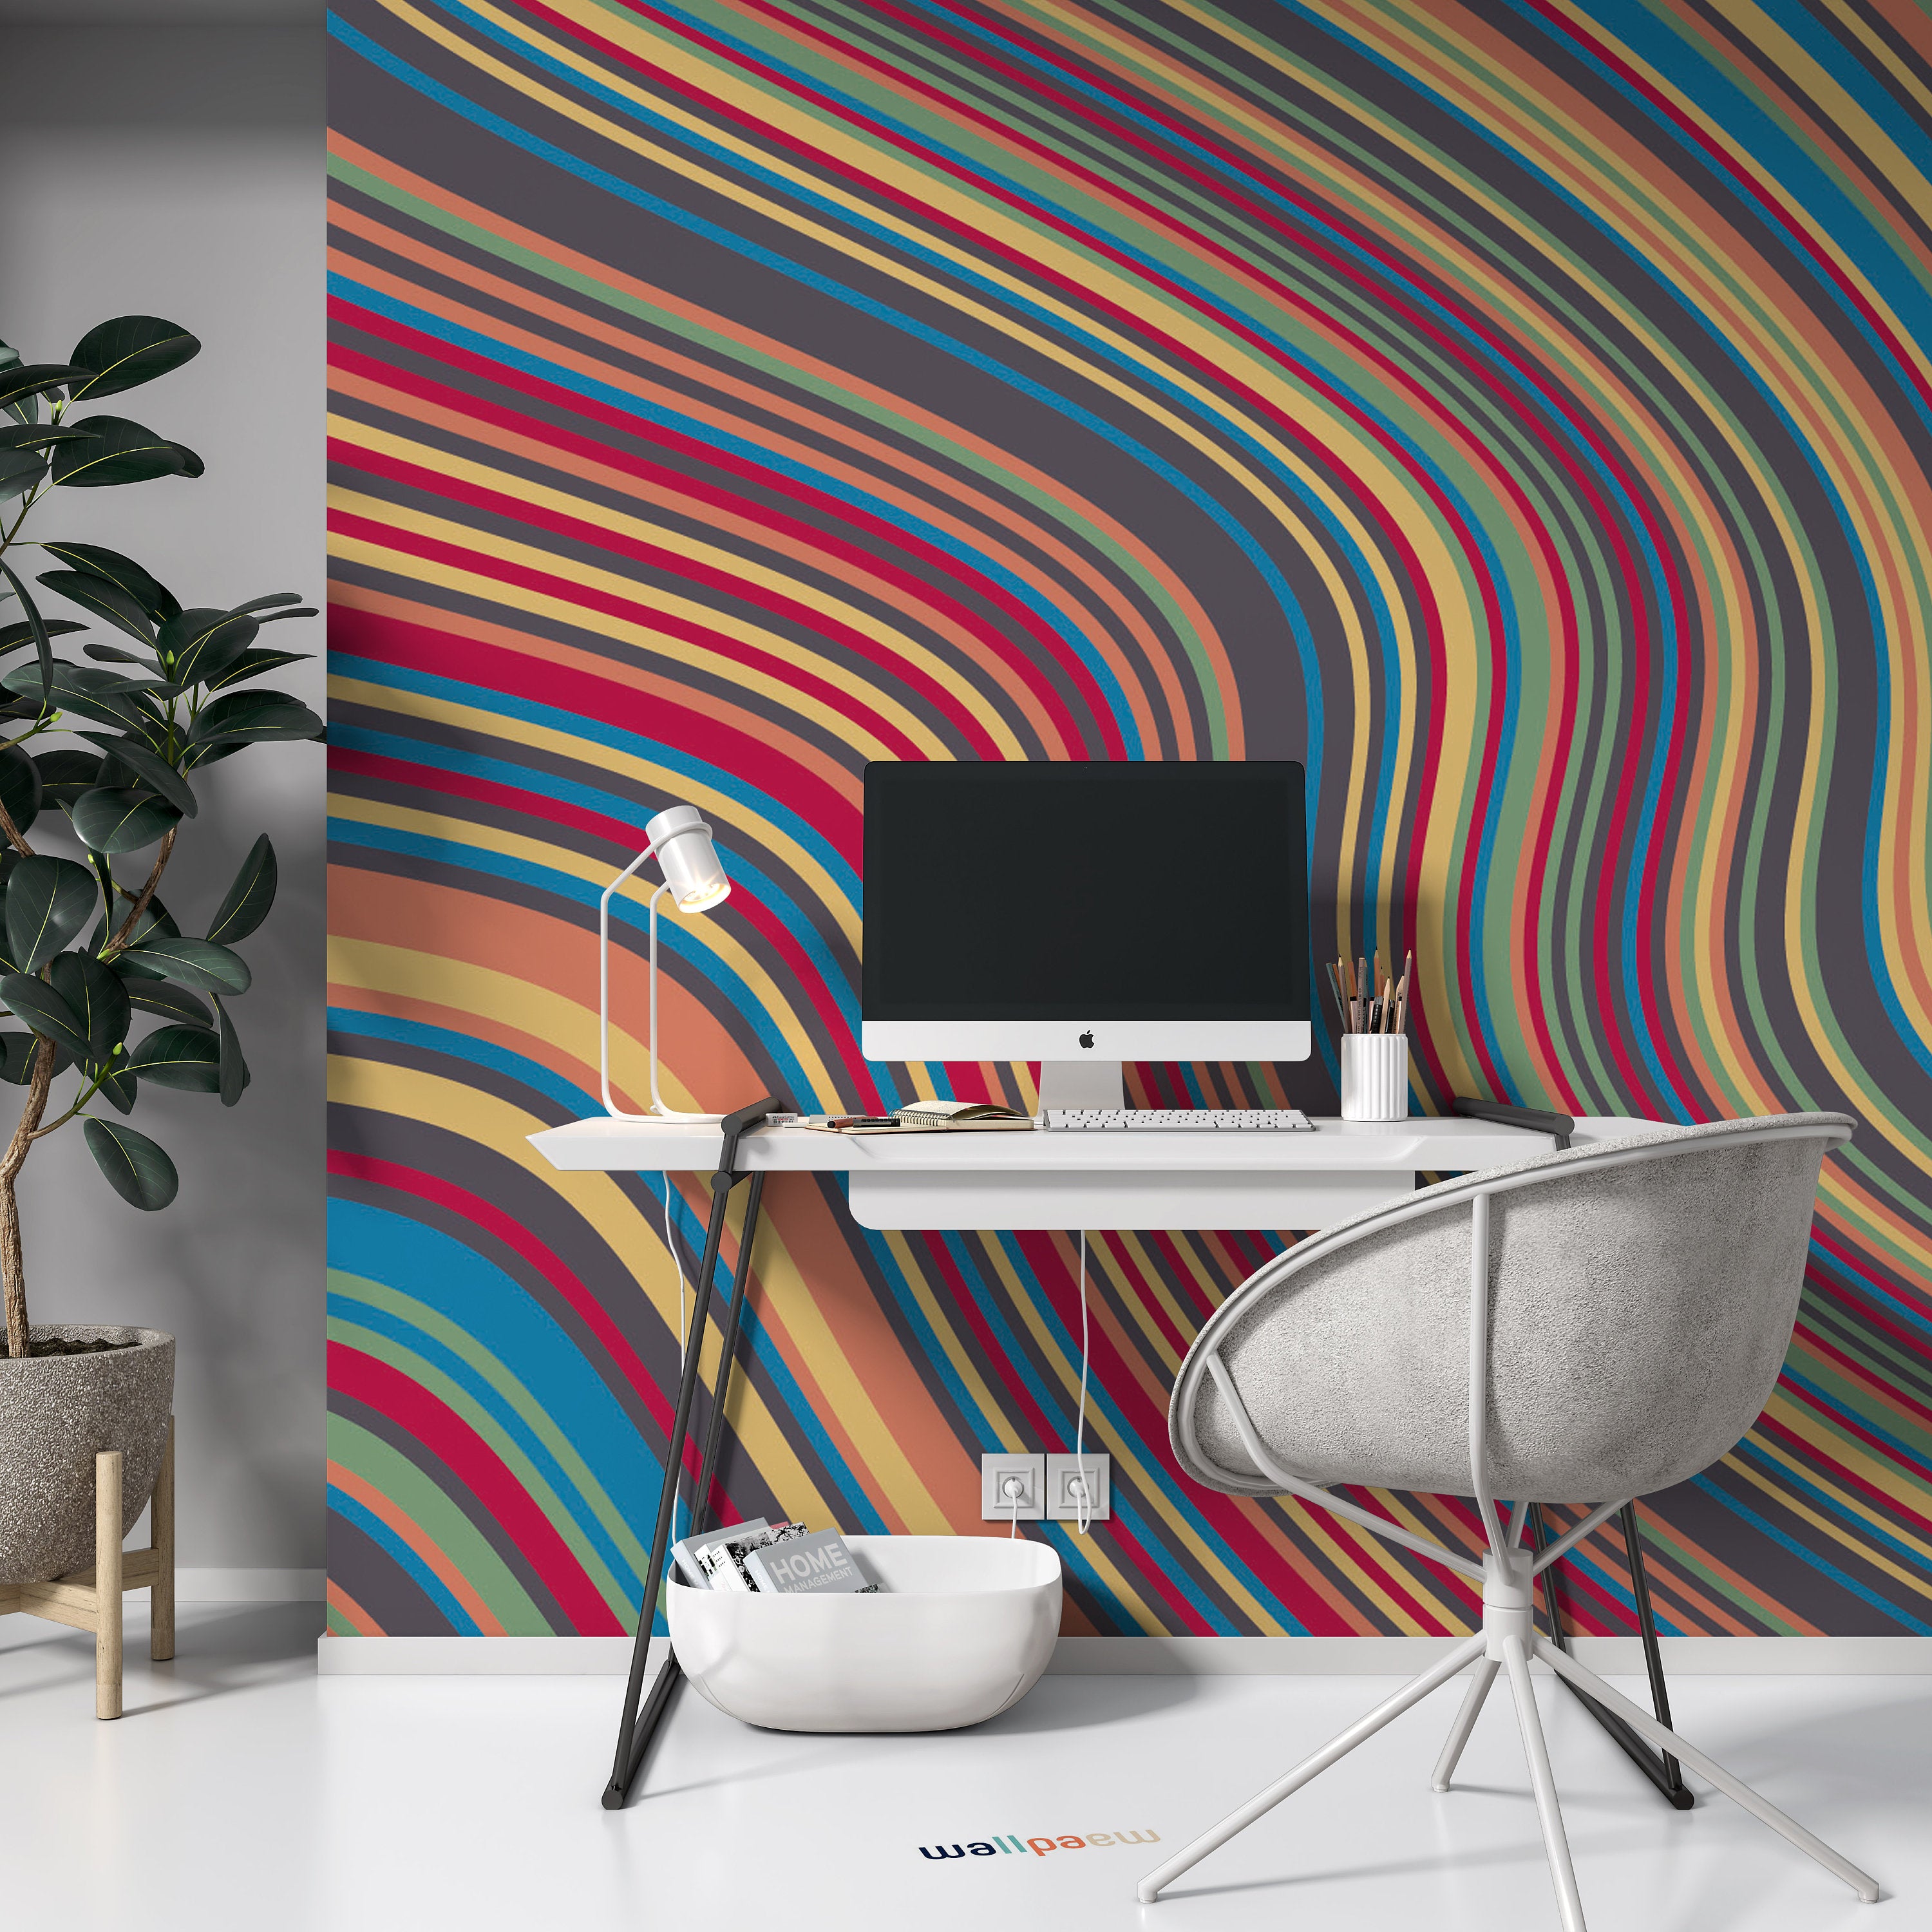 Abstract Background with Oblique Wavy Lines Rainbow Wallpaper Cafe Restaurant Decoration Living Room Bedroom Mural Home Decor Wall Art